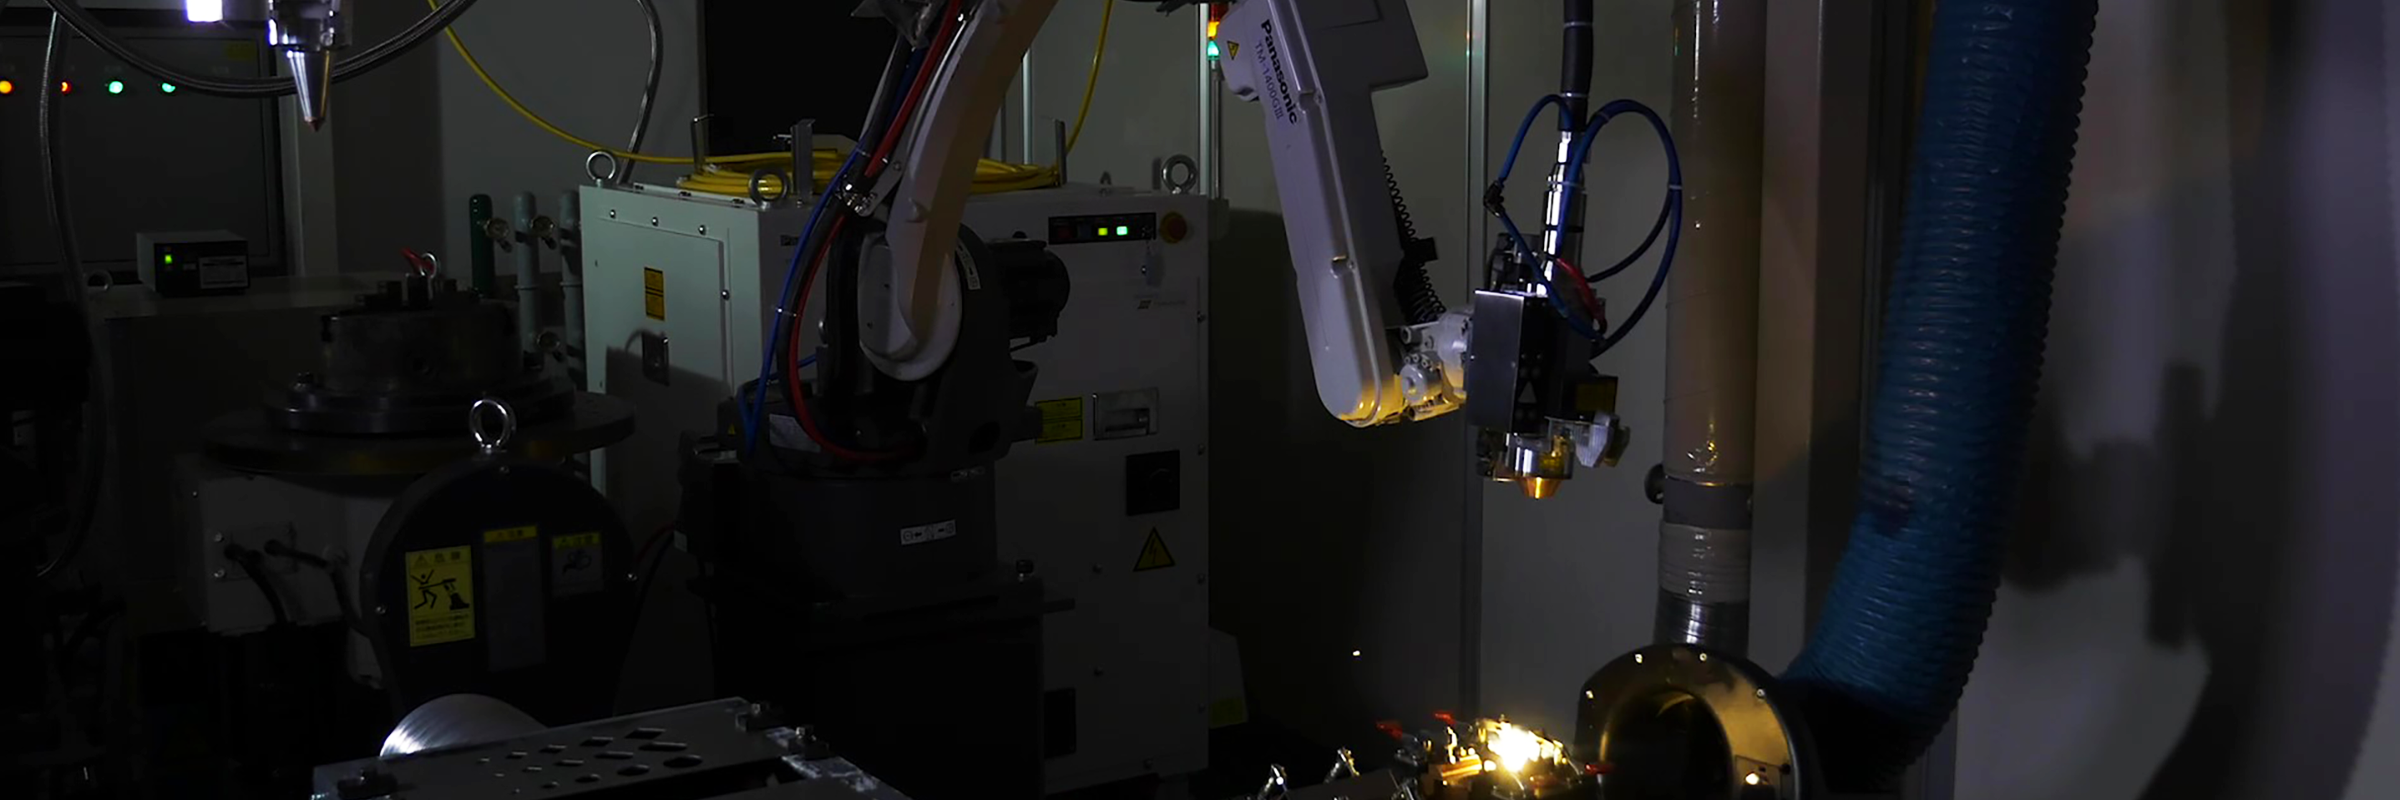 Remote laser welding / cutting robot systems